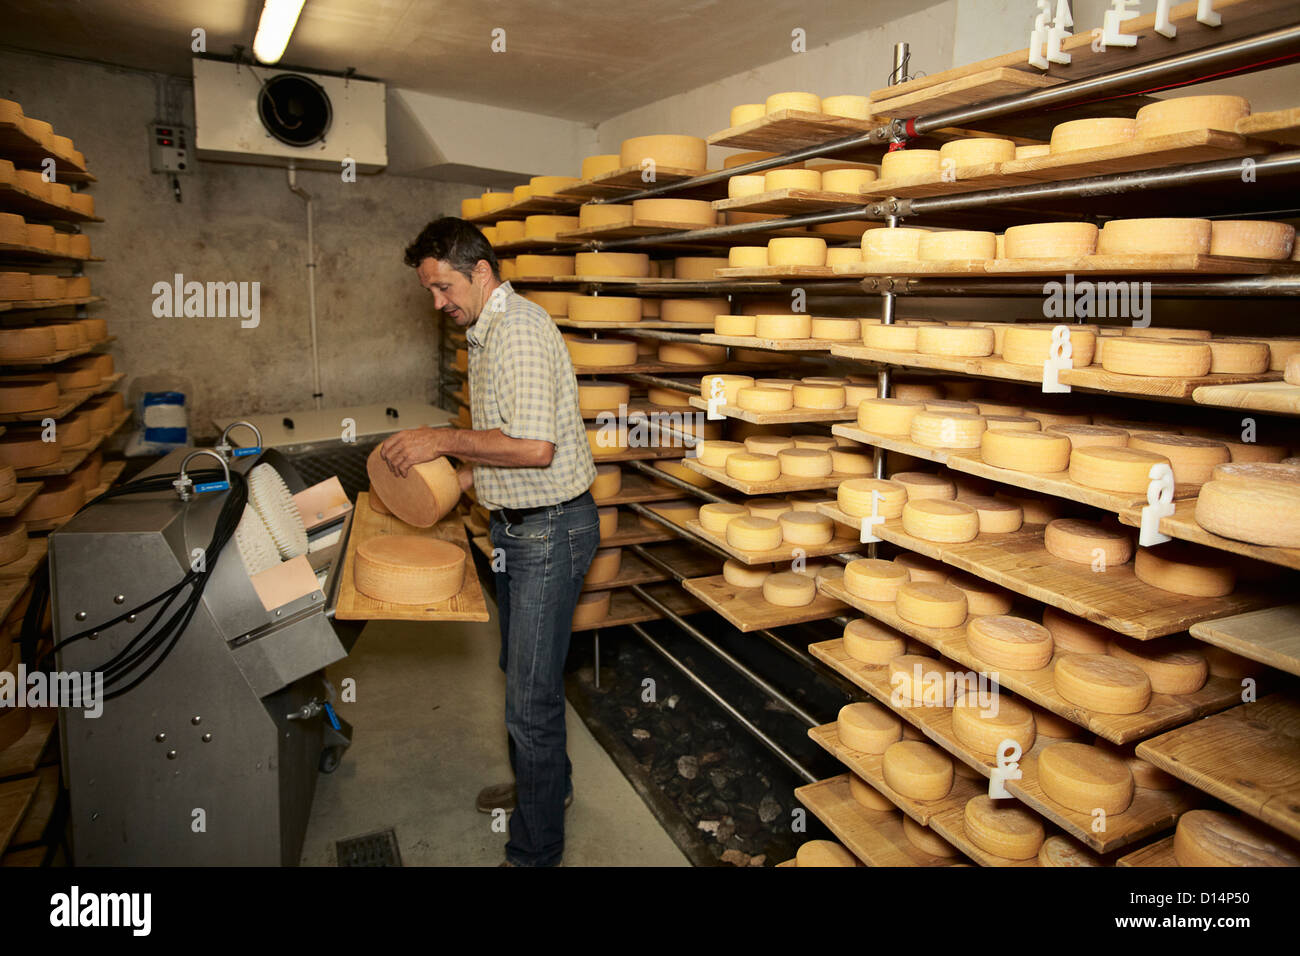 Worker finishing wheel of cheese in shop Stock Photo